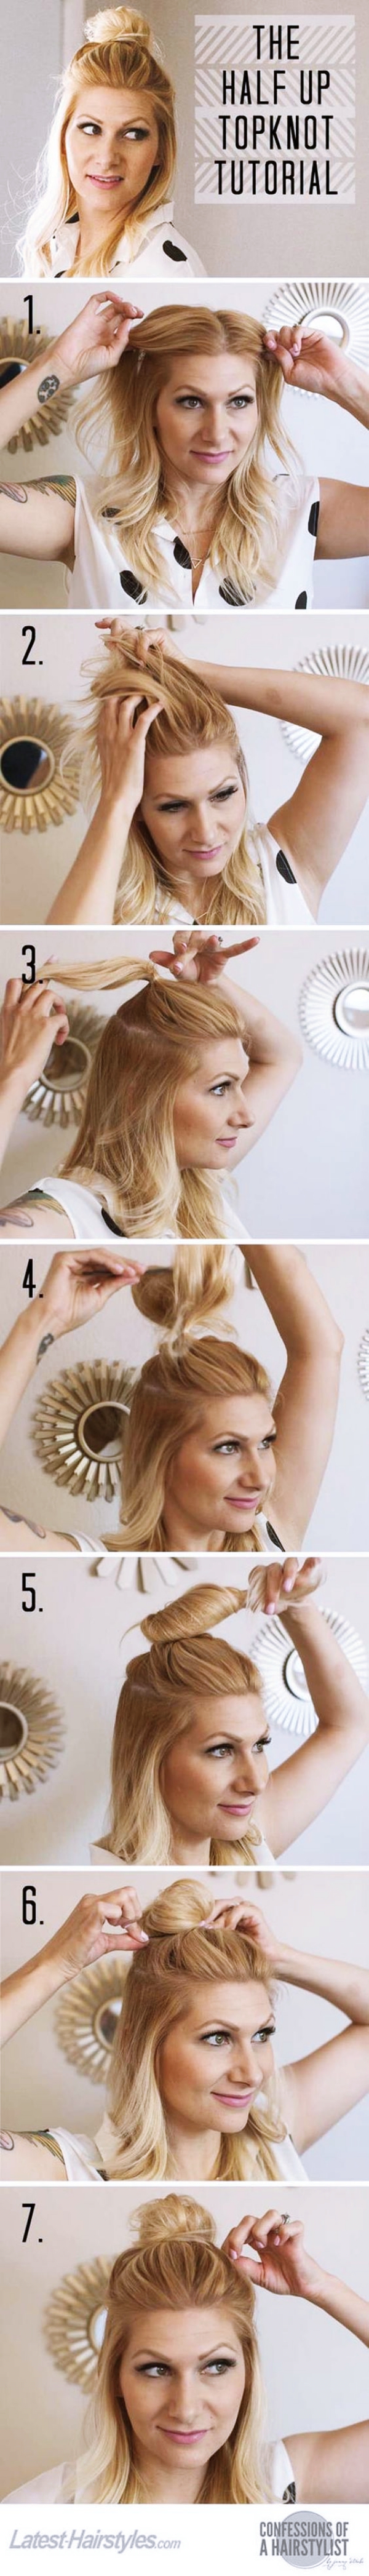 Quick-Hairstyles-Guides-For-Office-Women